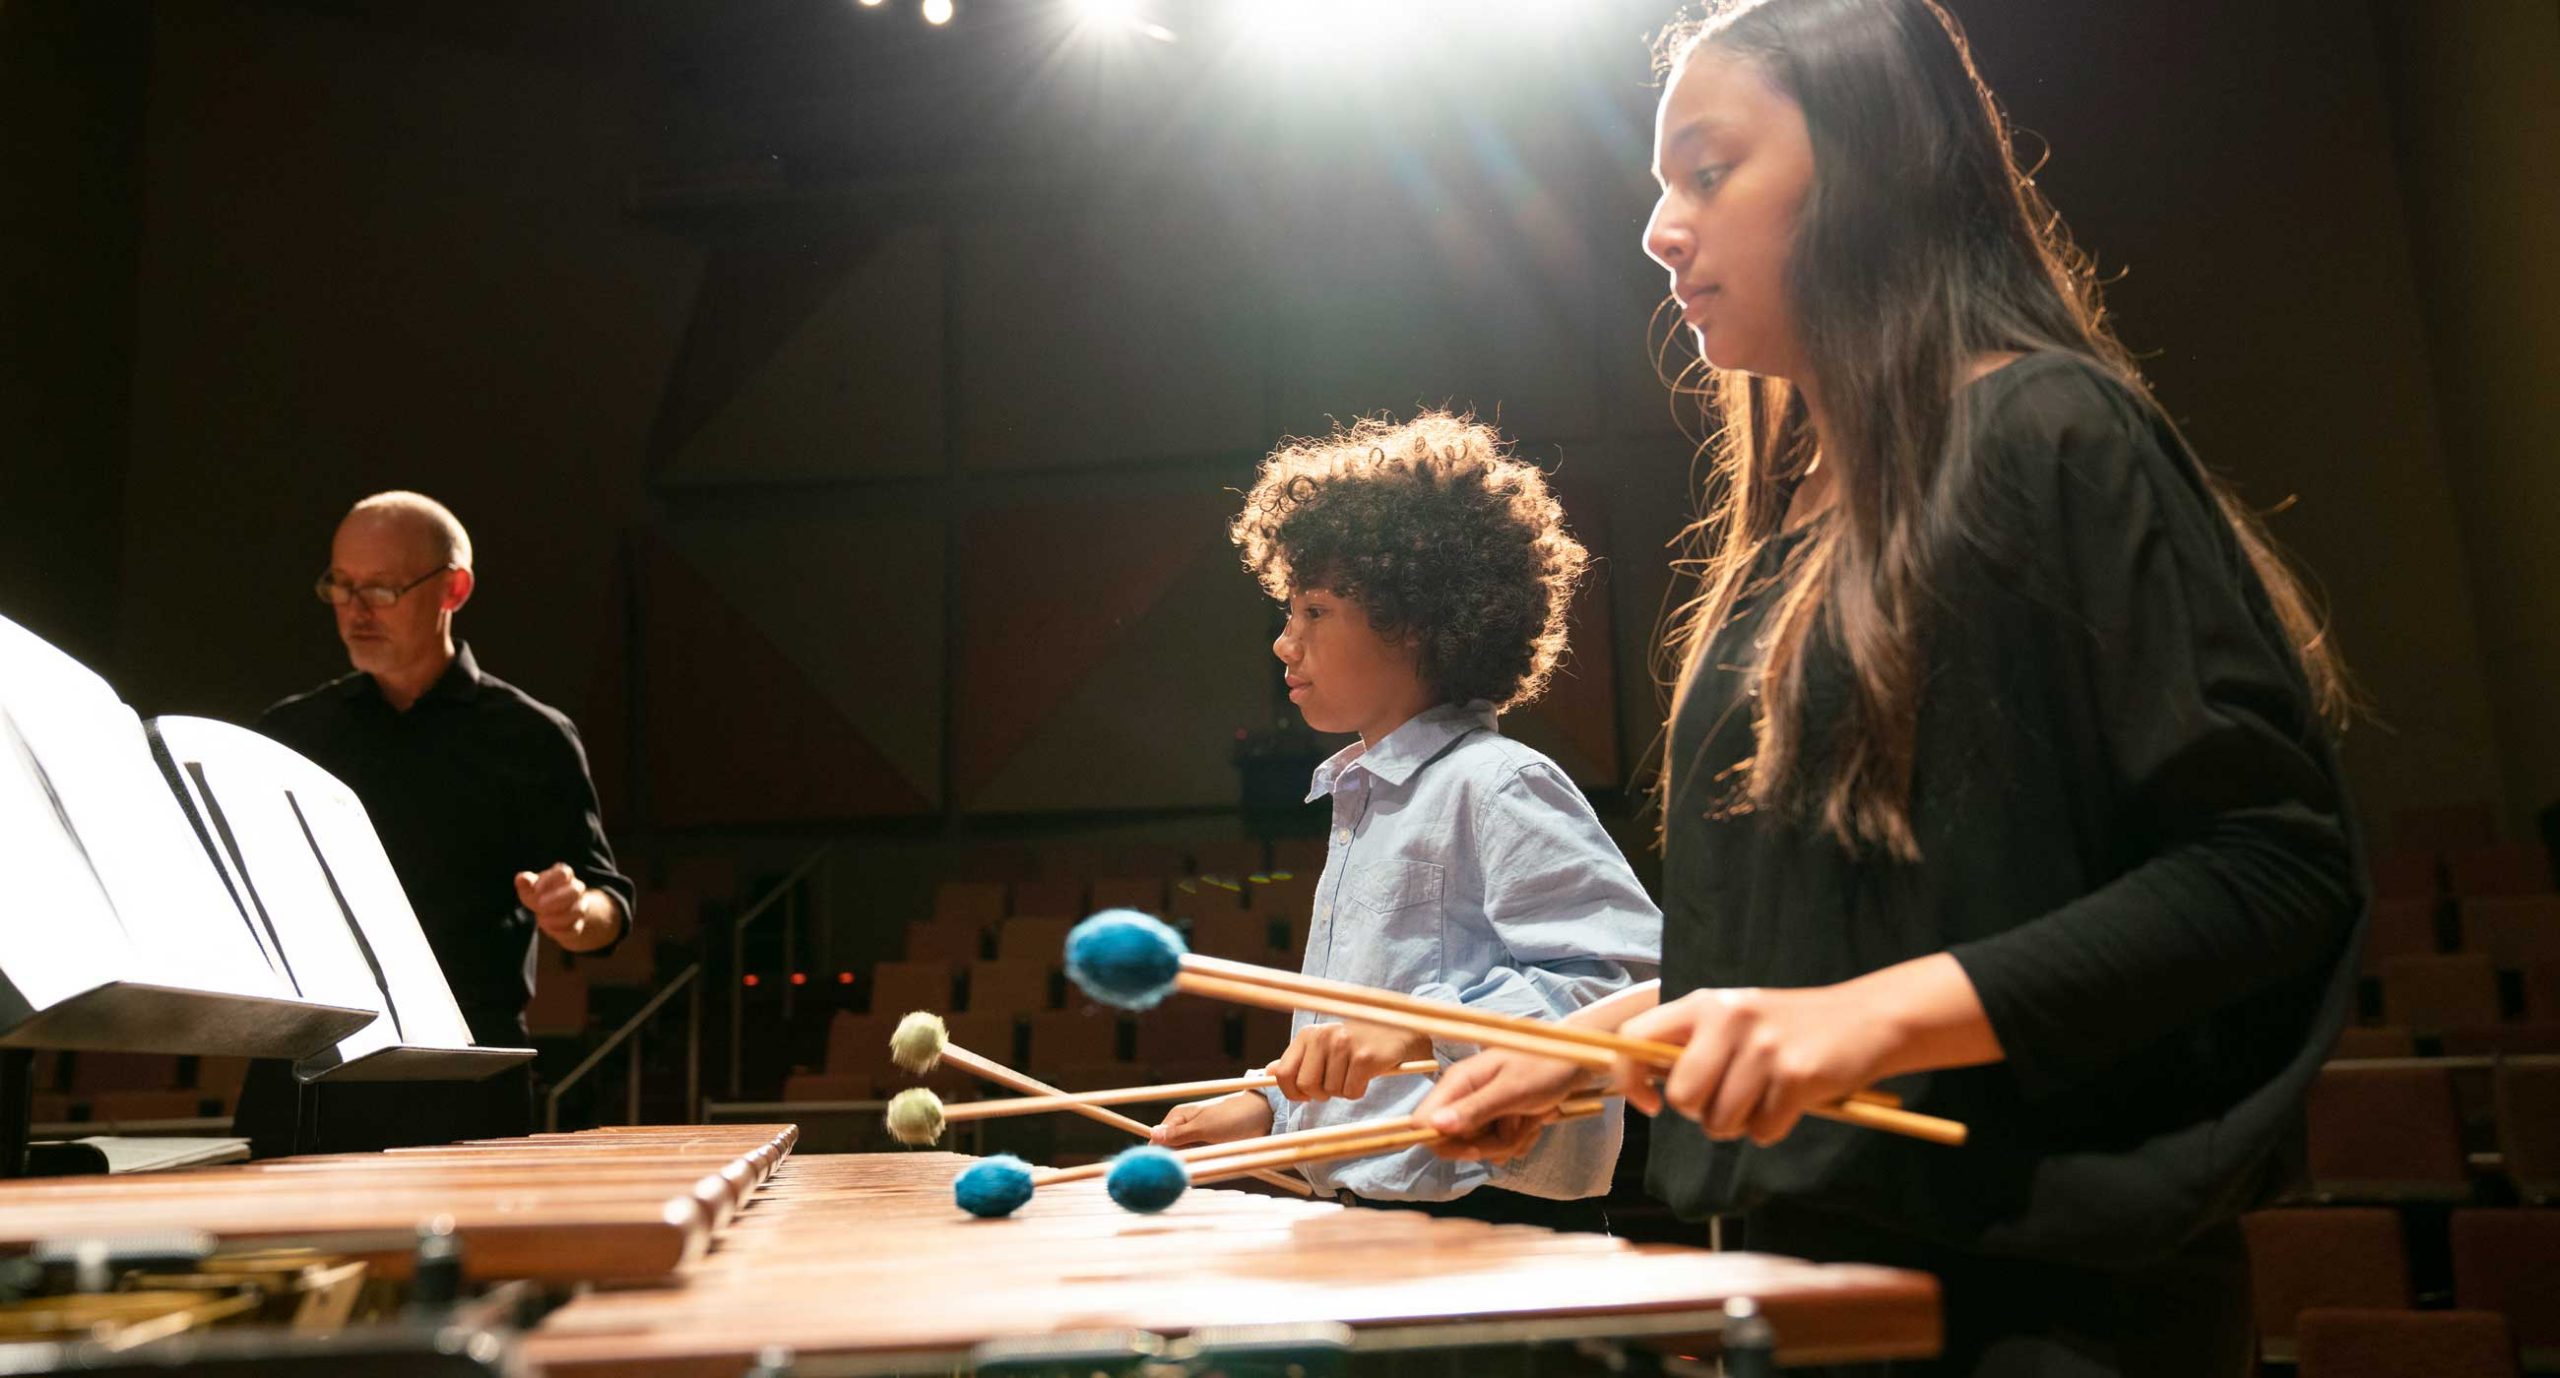 Girl and boy with playing marimba with mallets in hands on stage, teacher Ken McGrath in background